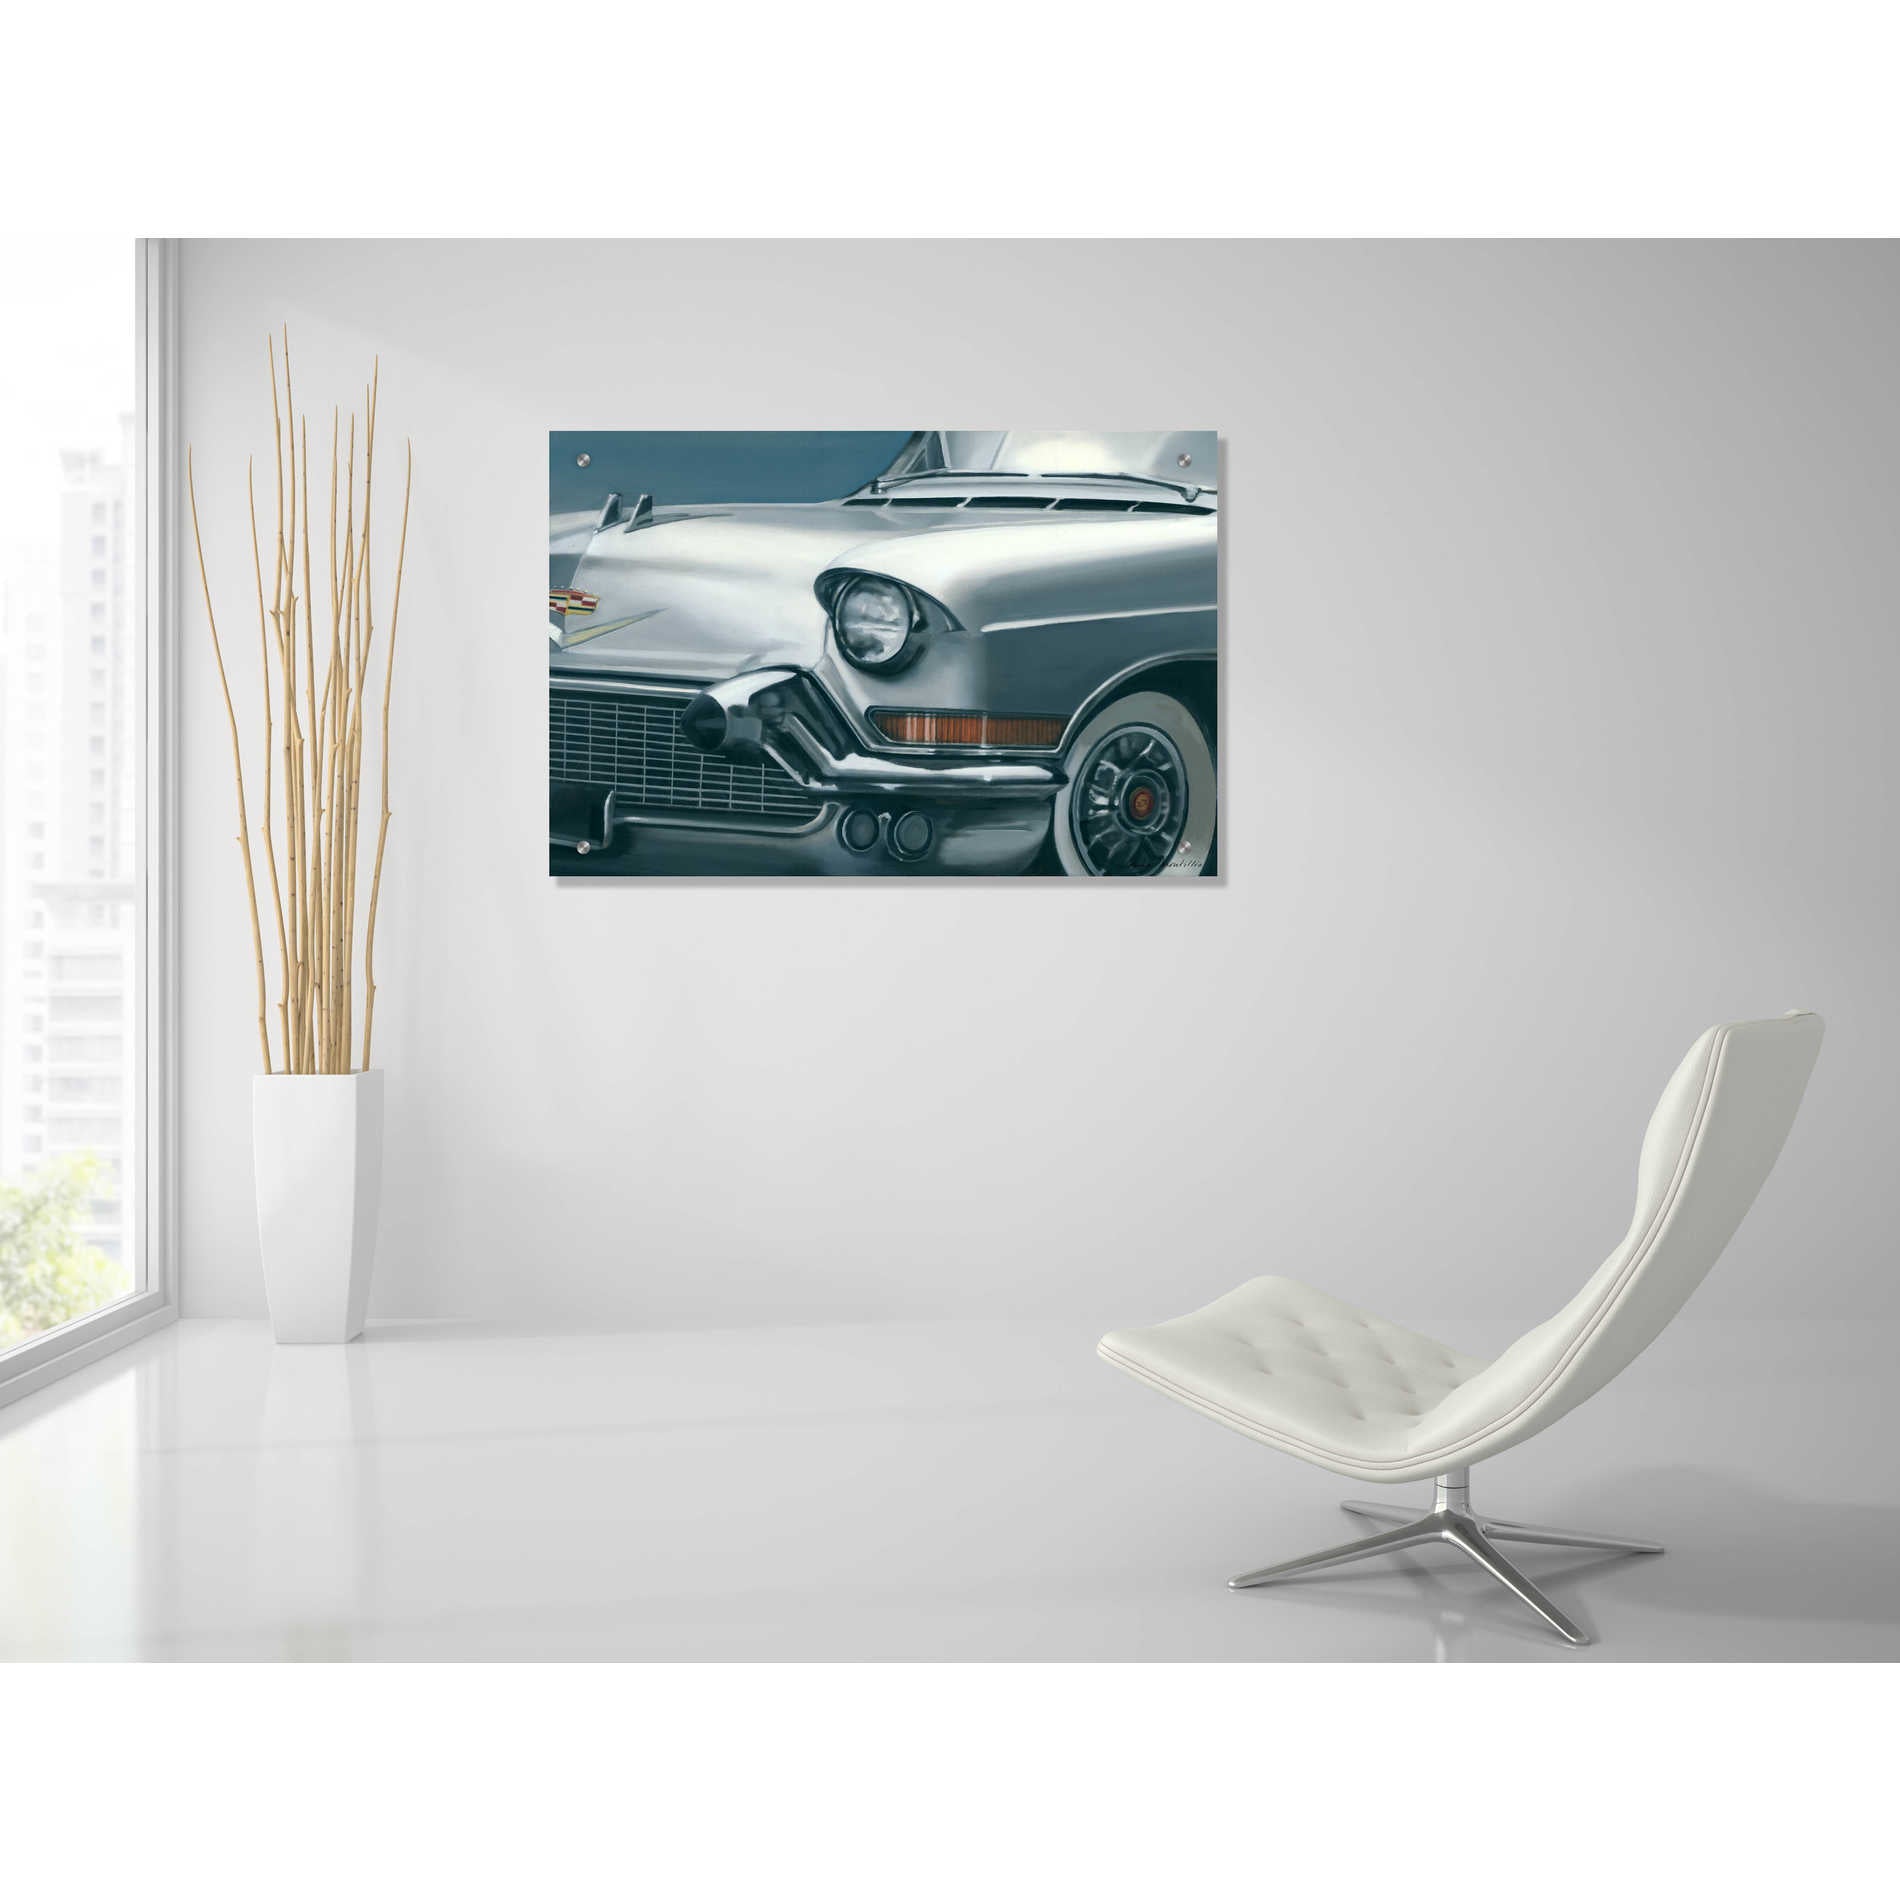 Epic Art 'Vintage Silver Caddy' by Louise Montillio, Acrylic Glass Wall Art,36x24